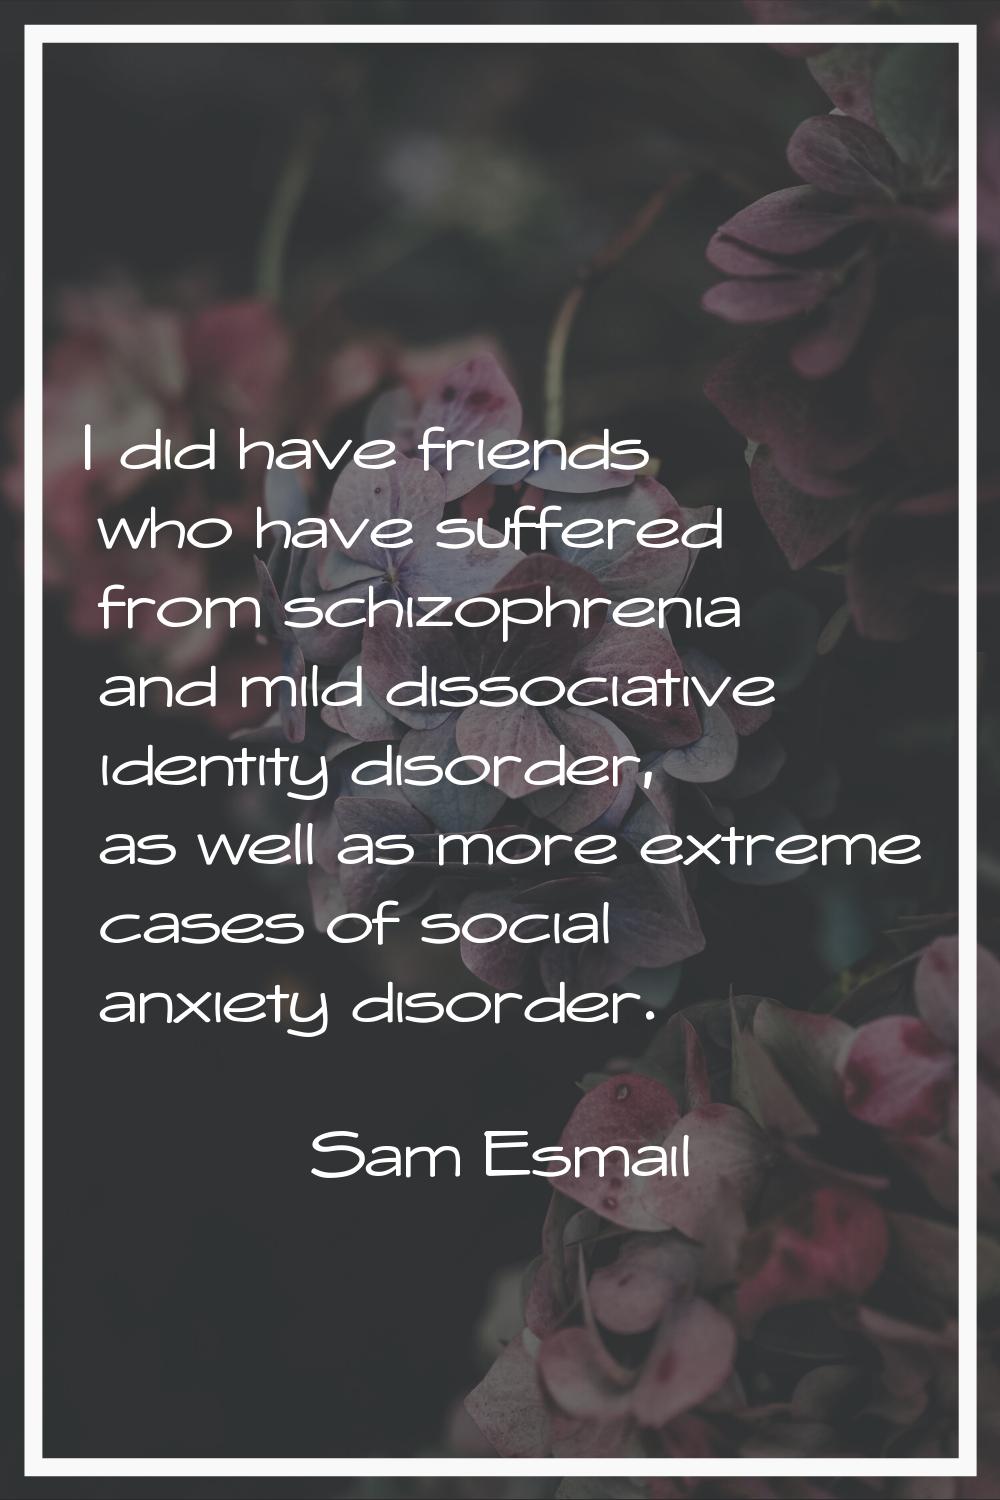 I did have friends who have suffered from schizophrenia and mild dissociative identity disorder, as